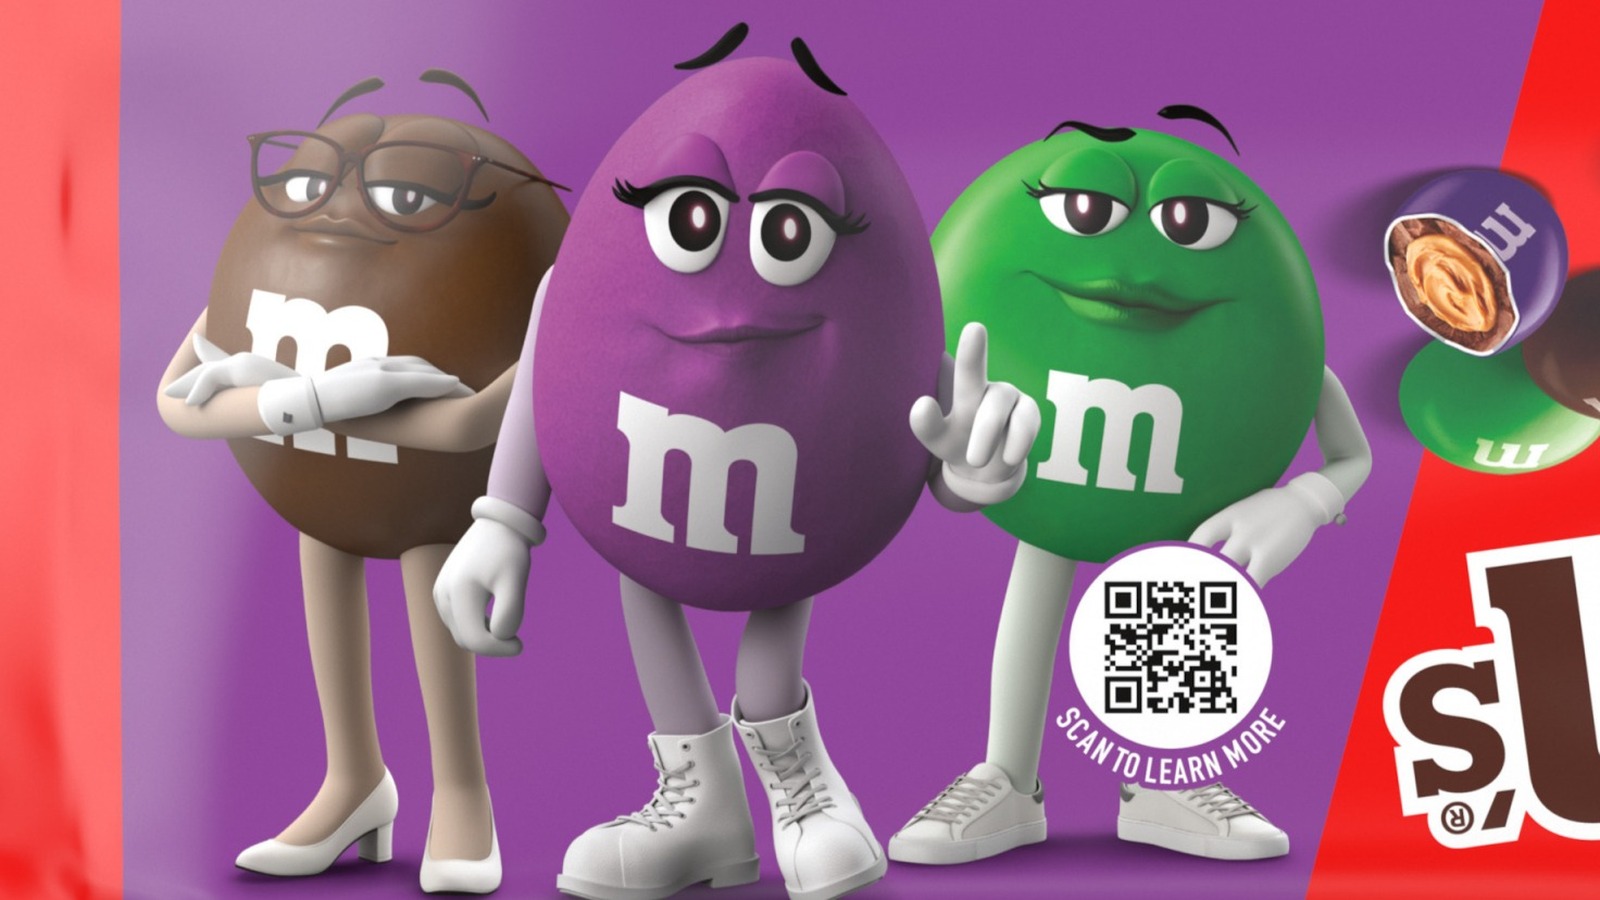 Find M&M's New Character, Purple, on New Caramel Cold Brew Packs, FN Dish  - Behind-the-Scenes, Food Trends, and Best Recipes : Food Network